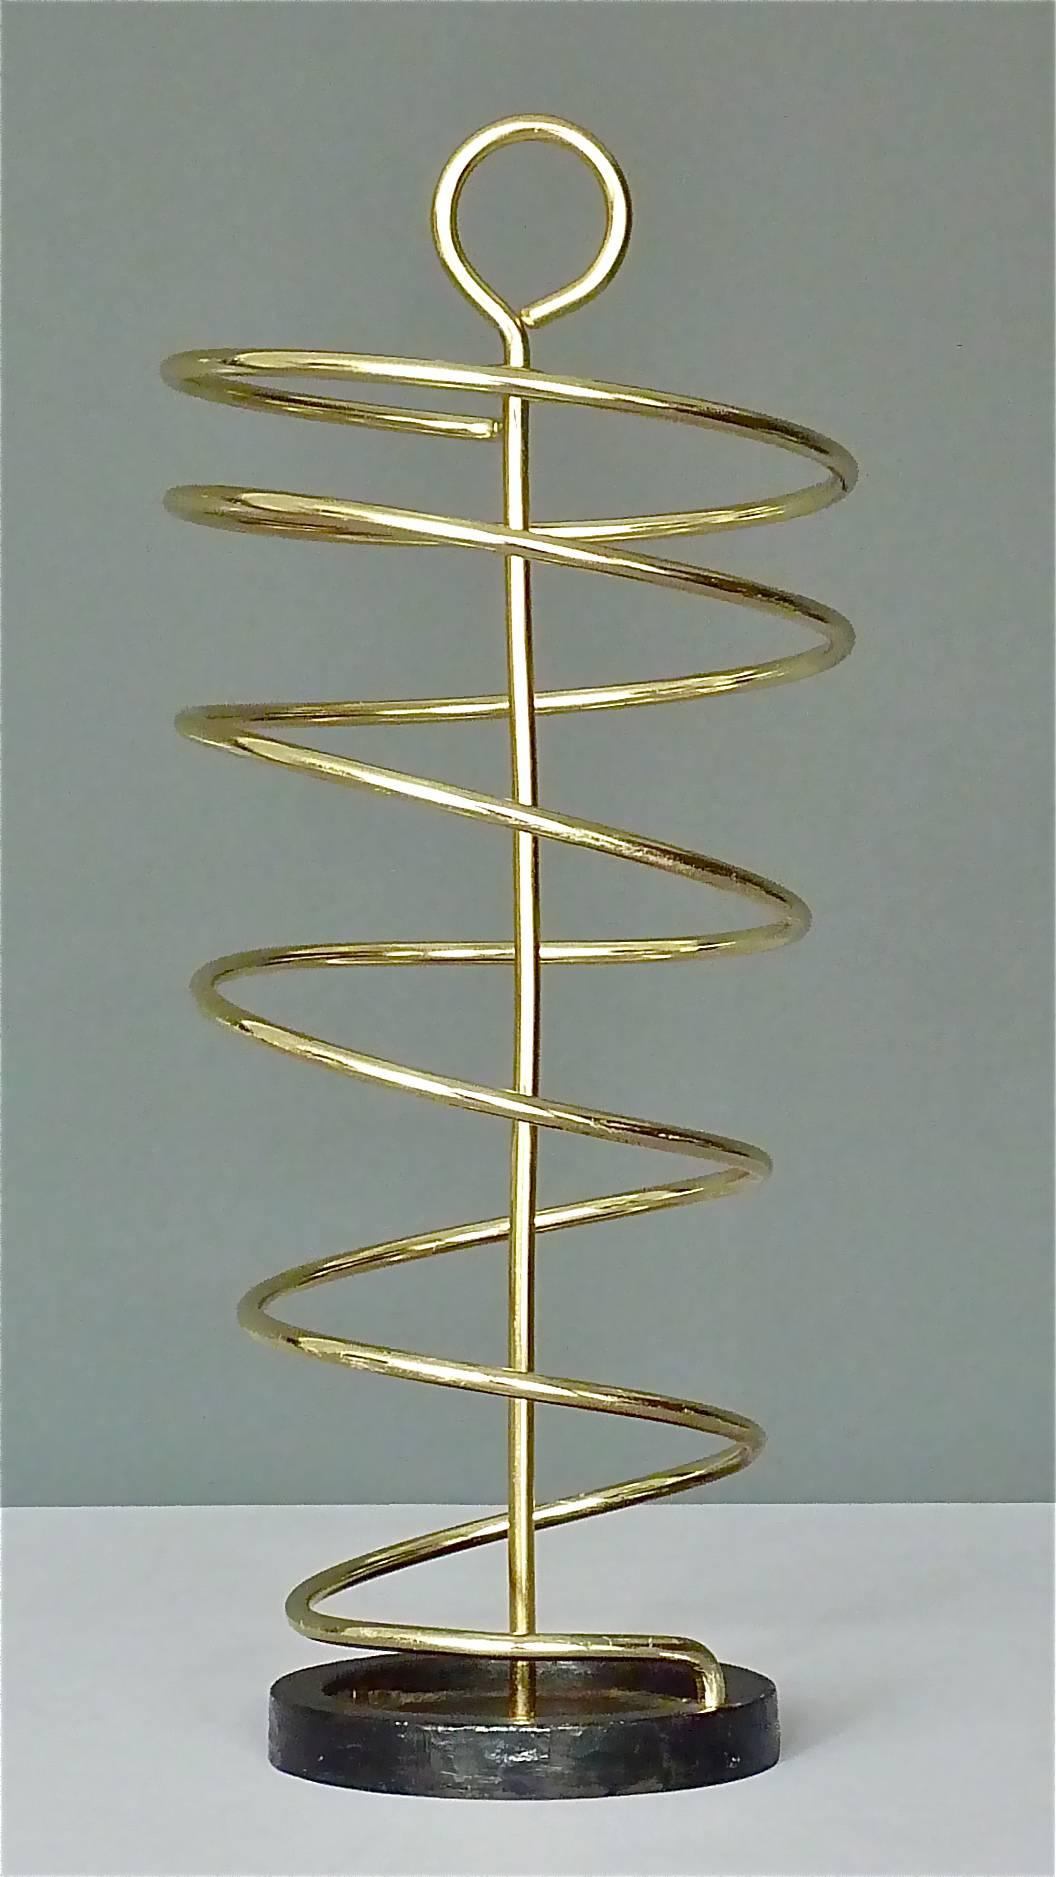 Fantastic sculptural midcentury “Spirale“ umbrella stand designed and executed in the 1950´s in Italy. It is made of golden color anodized aluminum metal formed to an up-going spiral with handle and a black enameled iron base at the bottom for a